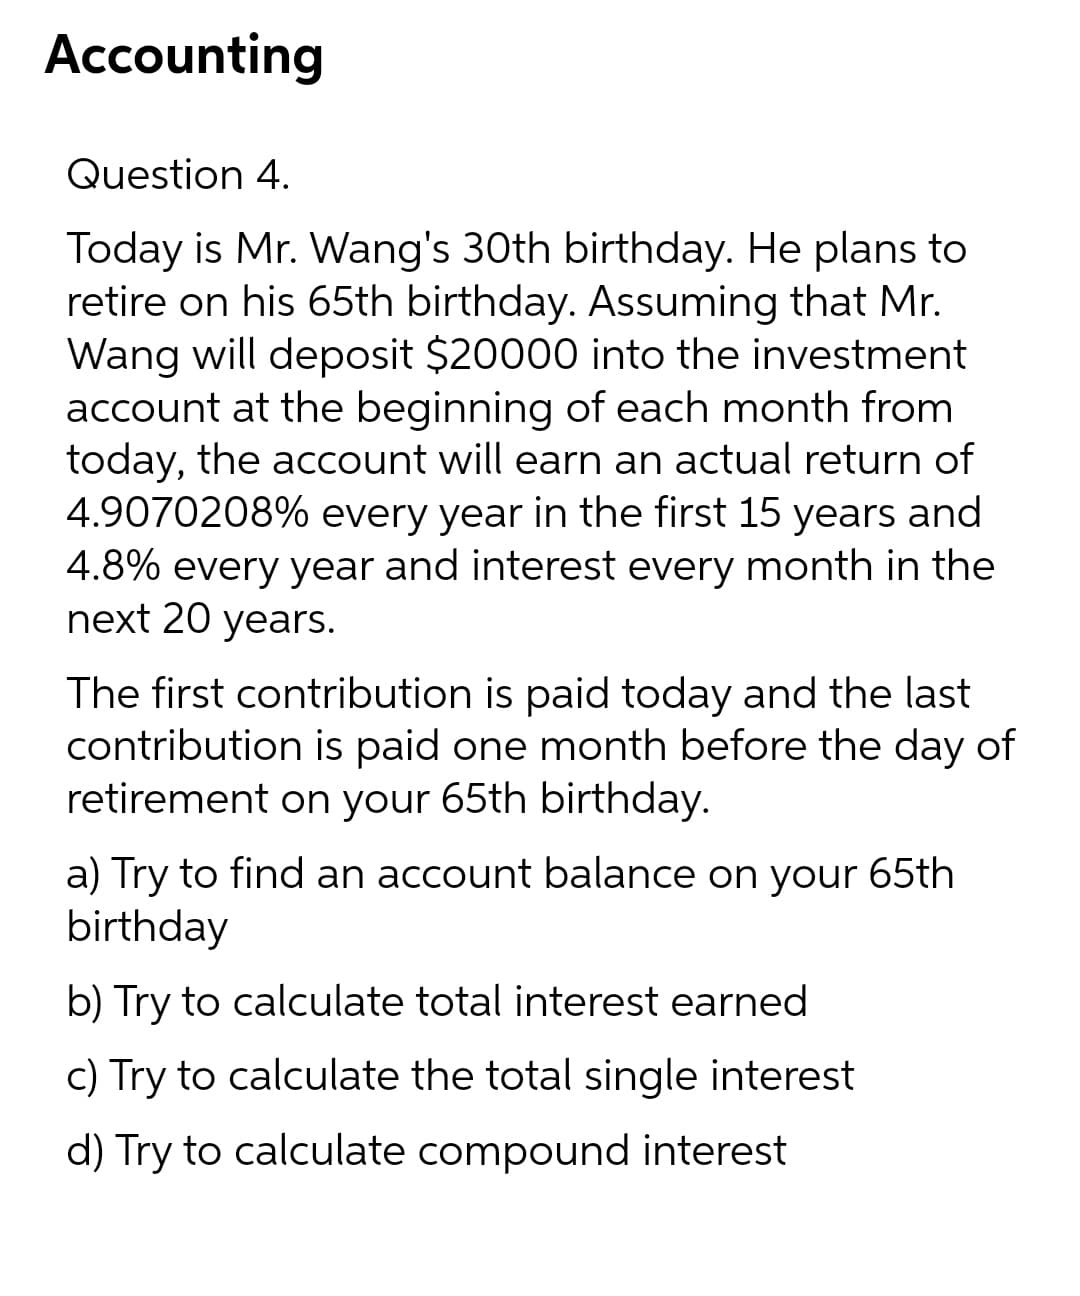 Accounting
Question 4.
Today is Mr. Wang's 30th birthday. He plans to
retire on his 65th birthday. Assuming that Mr.
Wang will deposit $20000 into the investment
account at the beginning of each month from
today, the account will earn an actual return of
4.9070208% every year in the first 15 years and
4.8% every year and interest every month in the
next 20 years.
The first contribution is paid today and the last
contribution is paid one month before the day of
retirement on your 65th birthday.
a) Try to find an account balance on your 65th
birthday
b) Try to calculate total interest earned
c) Try to calculate the total single interest
d) Try to calculate compound interest
